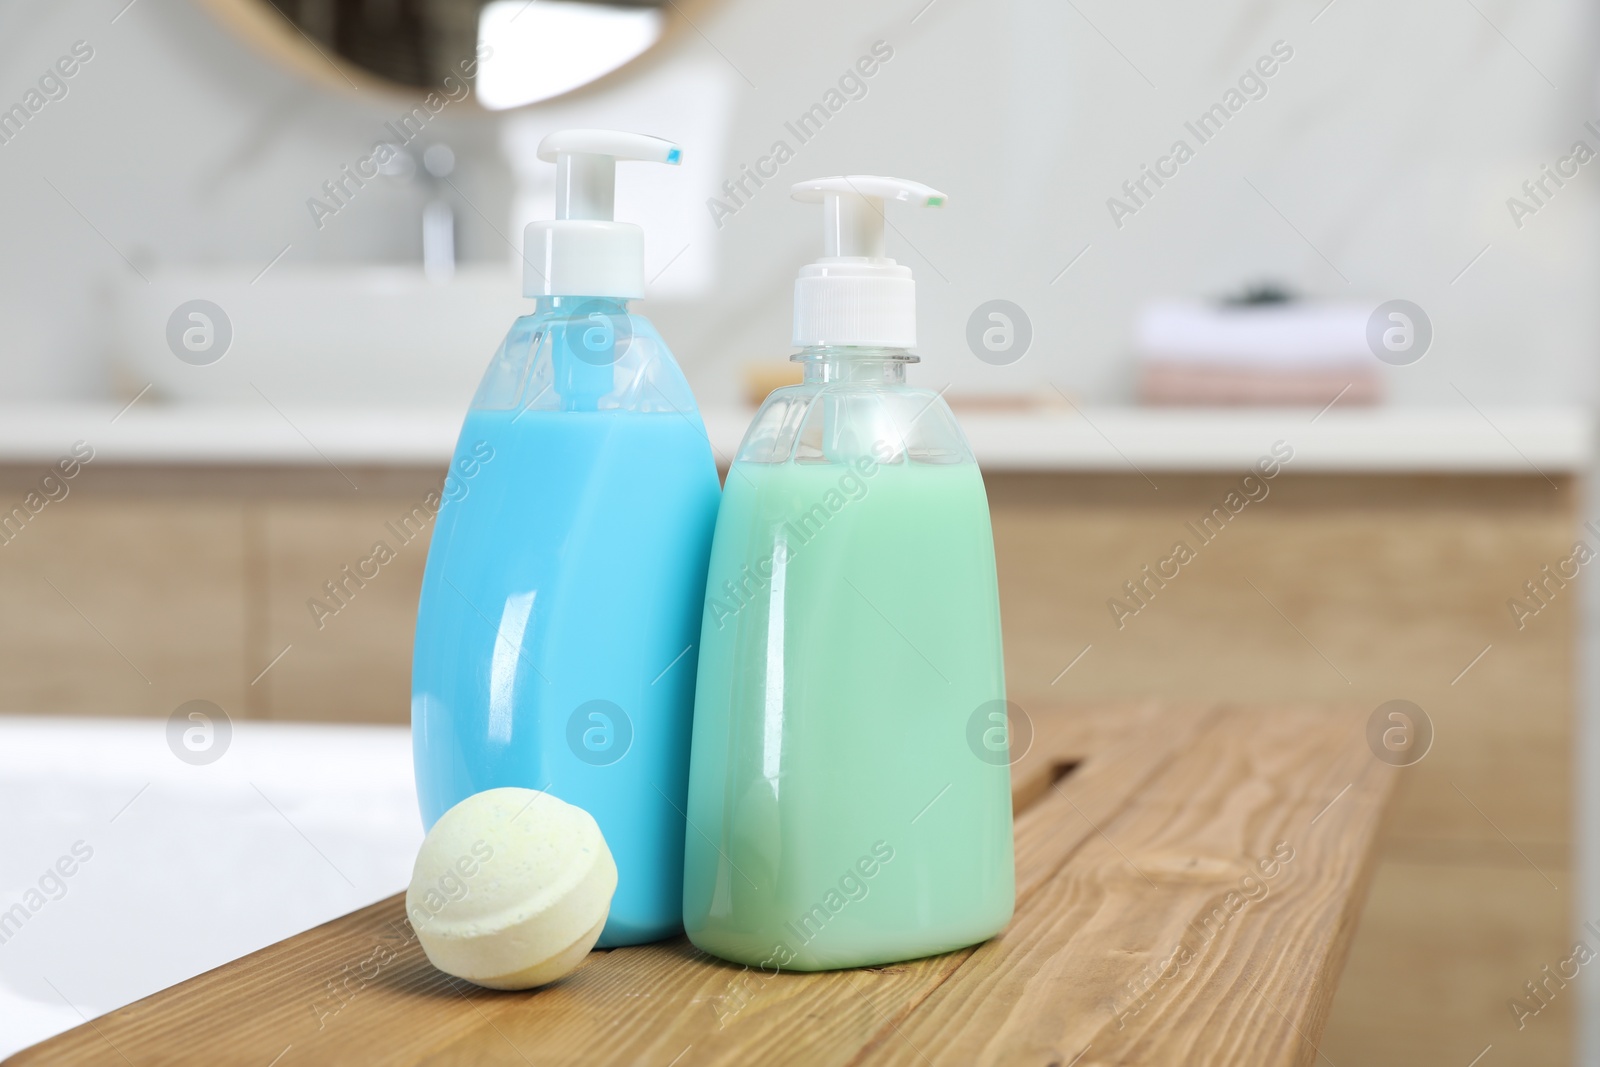 Photo of Bottles of shower gels and bath bomb on wooden table indoors